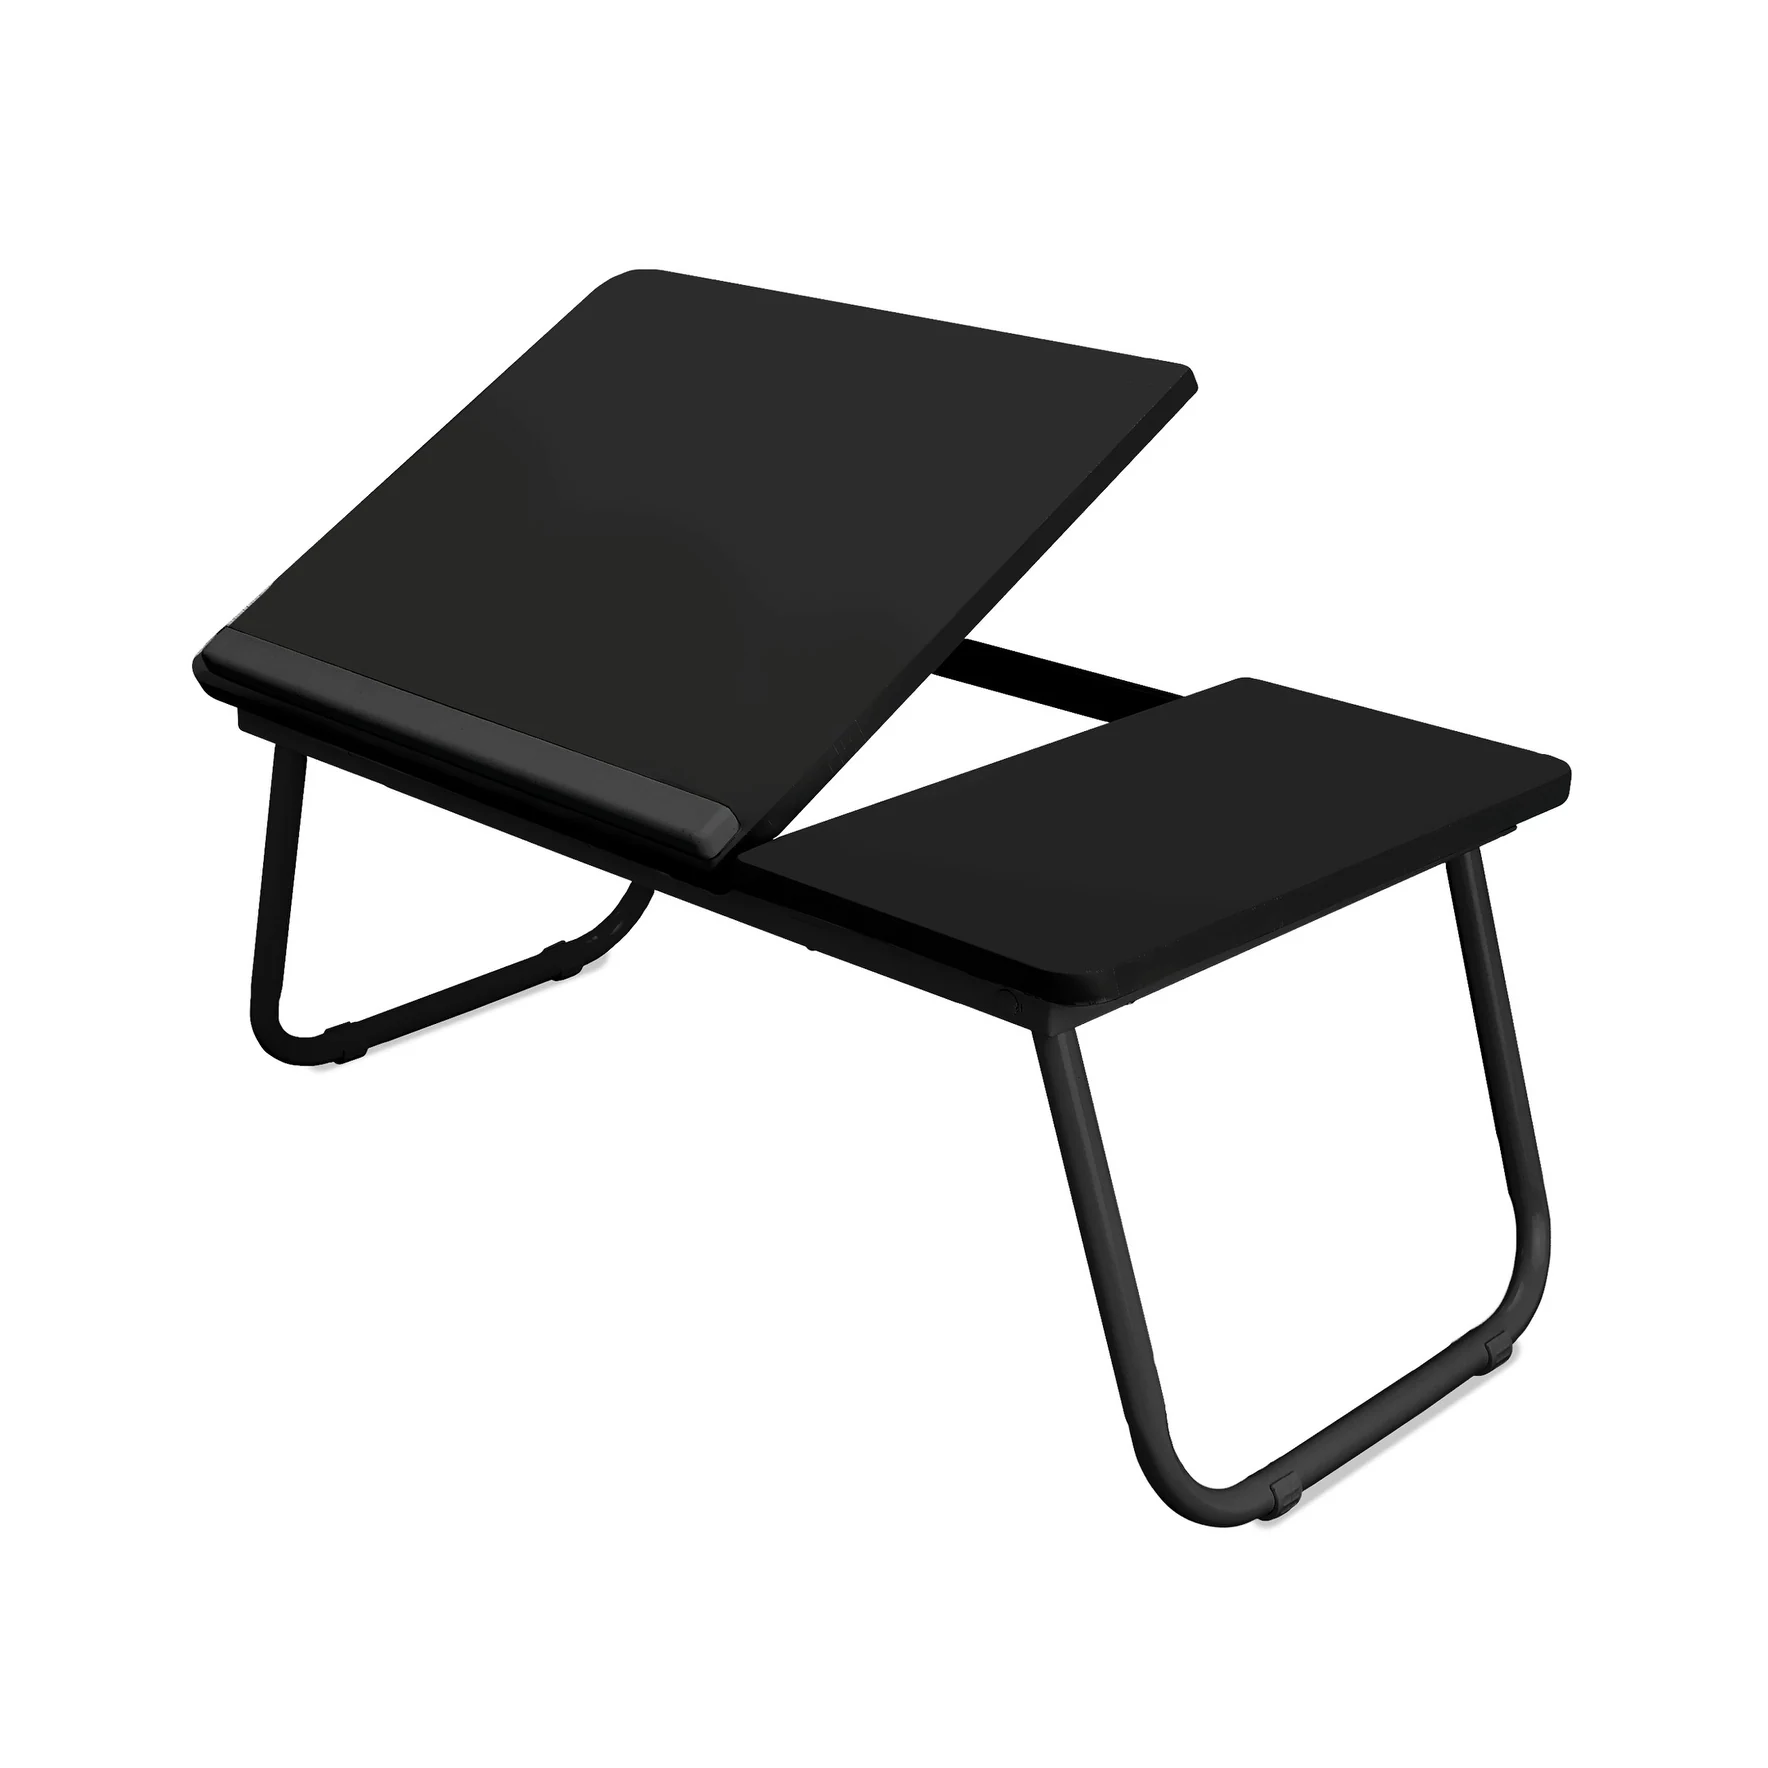 iltable And Foldable Double Head Laptop Table- Black Color